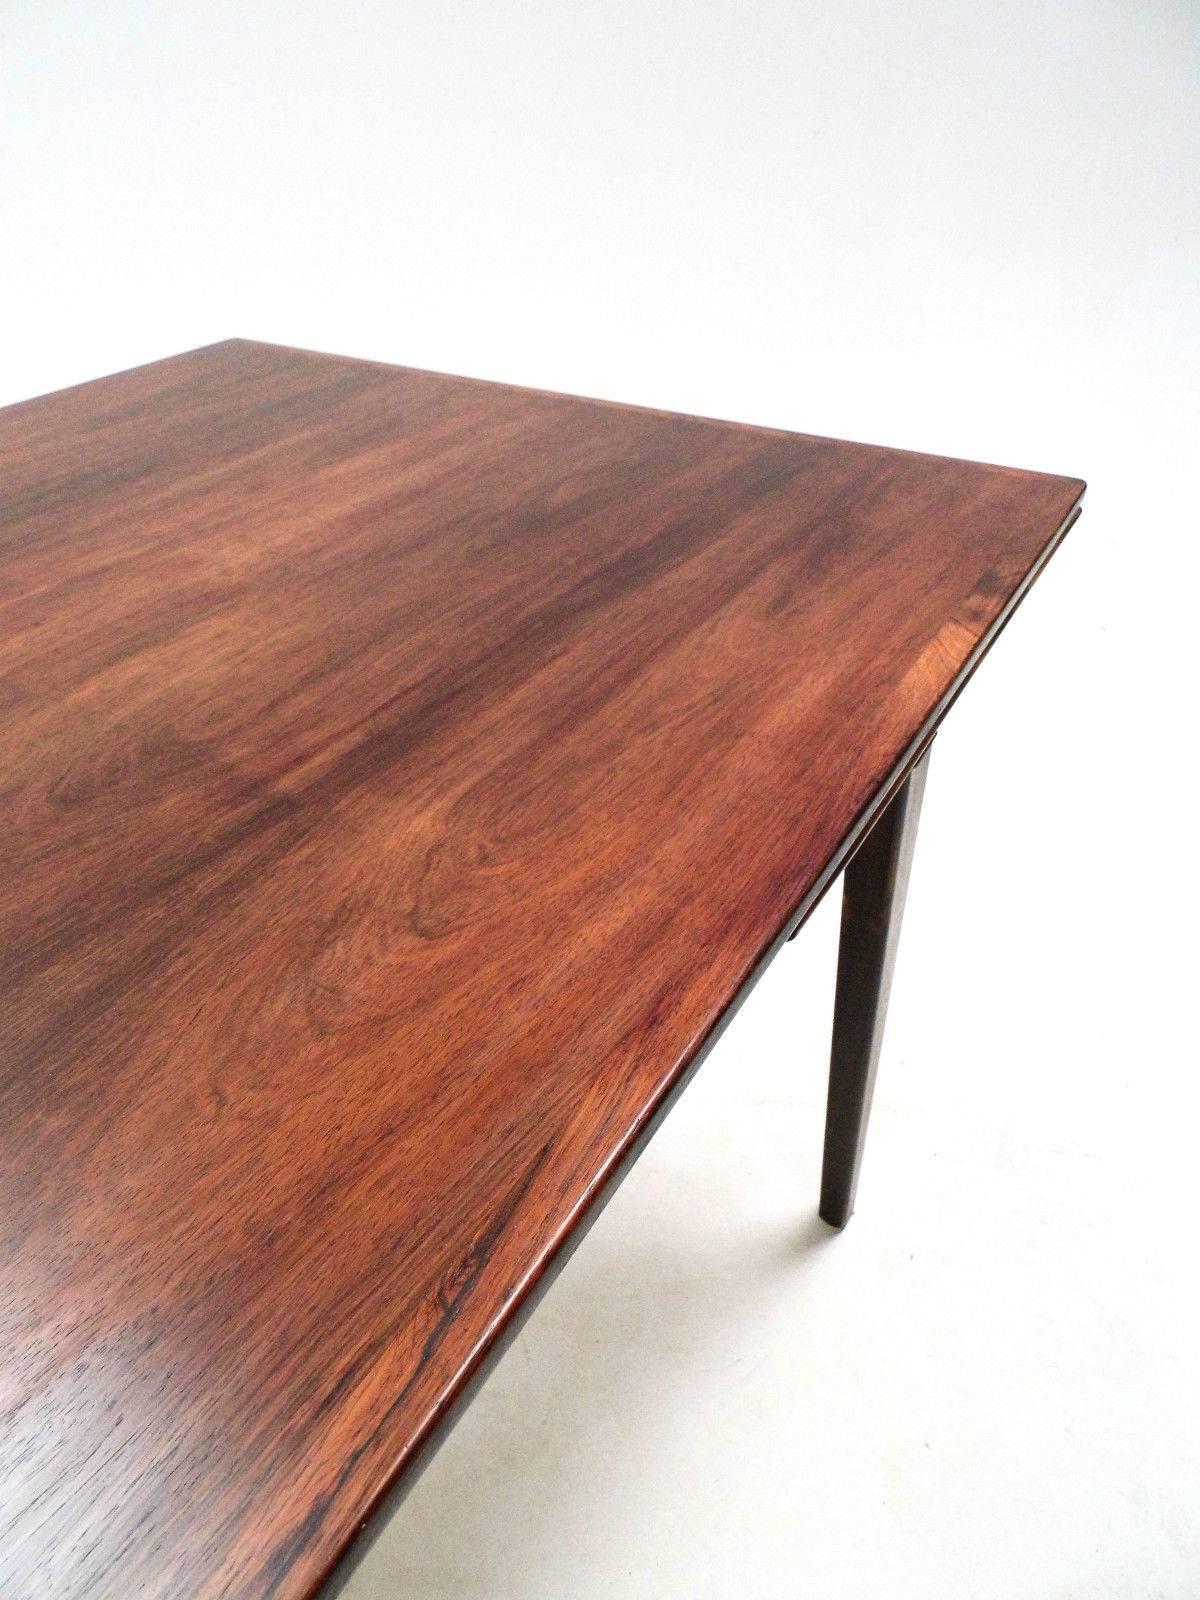 A beautiful Danish rosewood extending dining table designed by Johannes Andersen, this would make a stylish addition to any dining area. The table has two extension panels which fit discreetly below the top panel and can be pulled out when needed. A